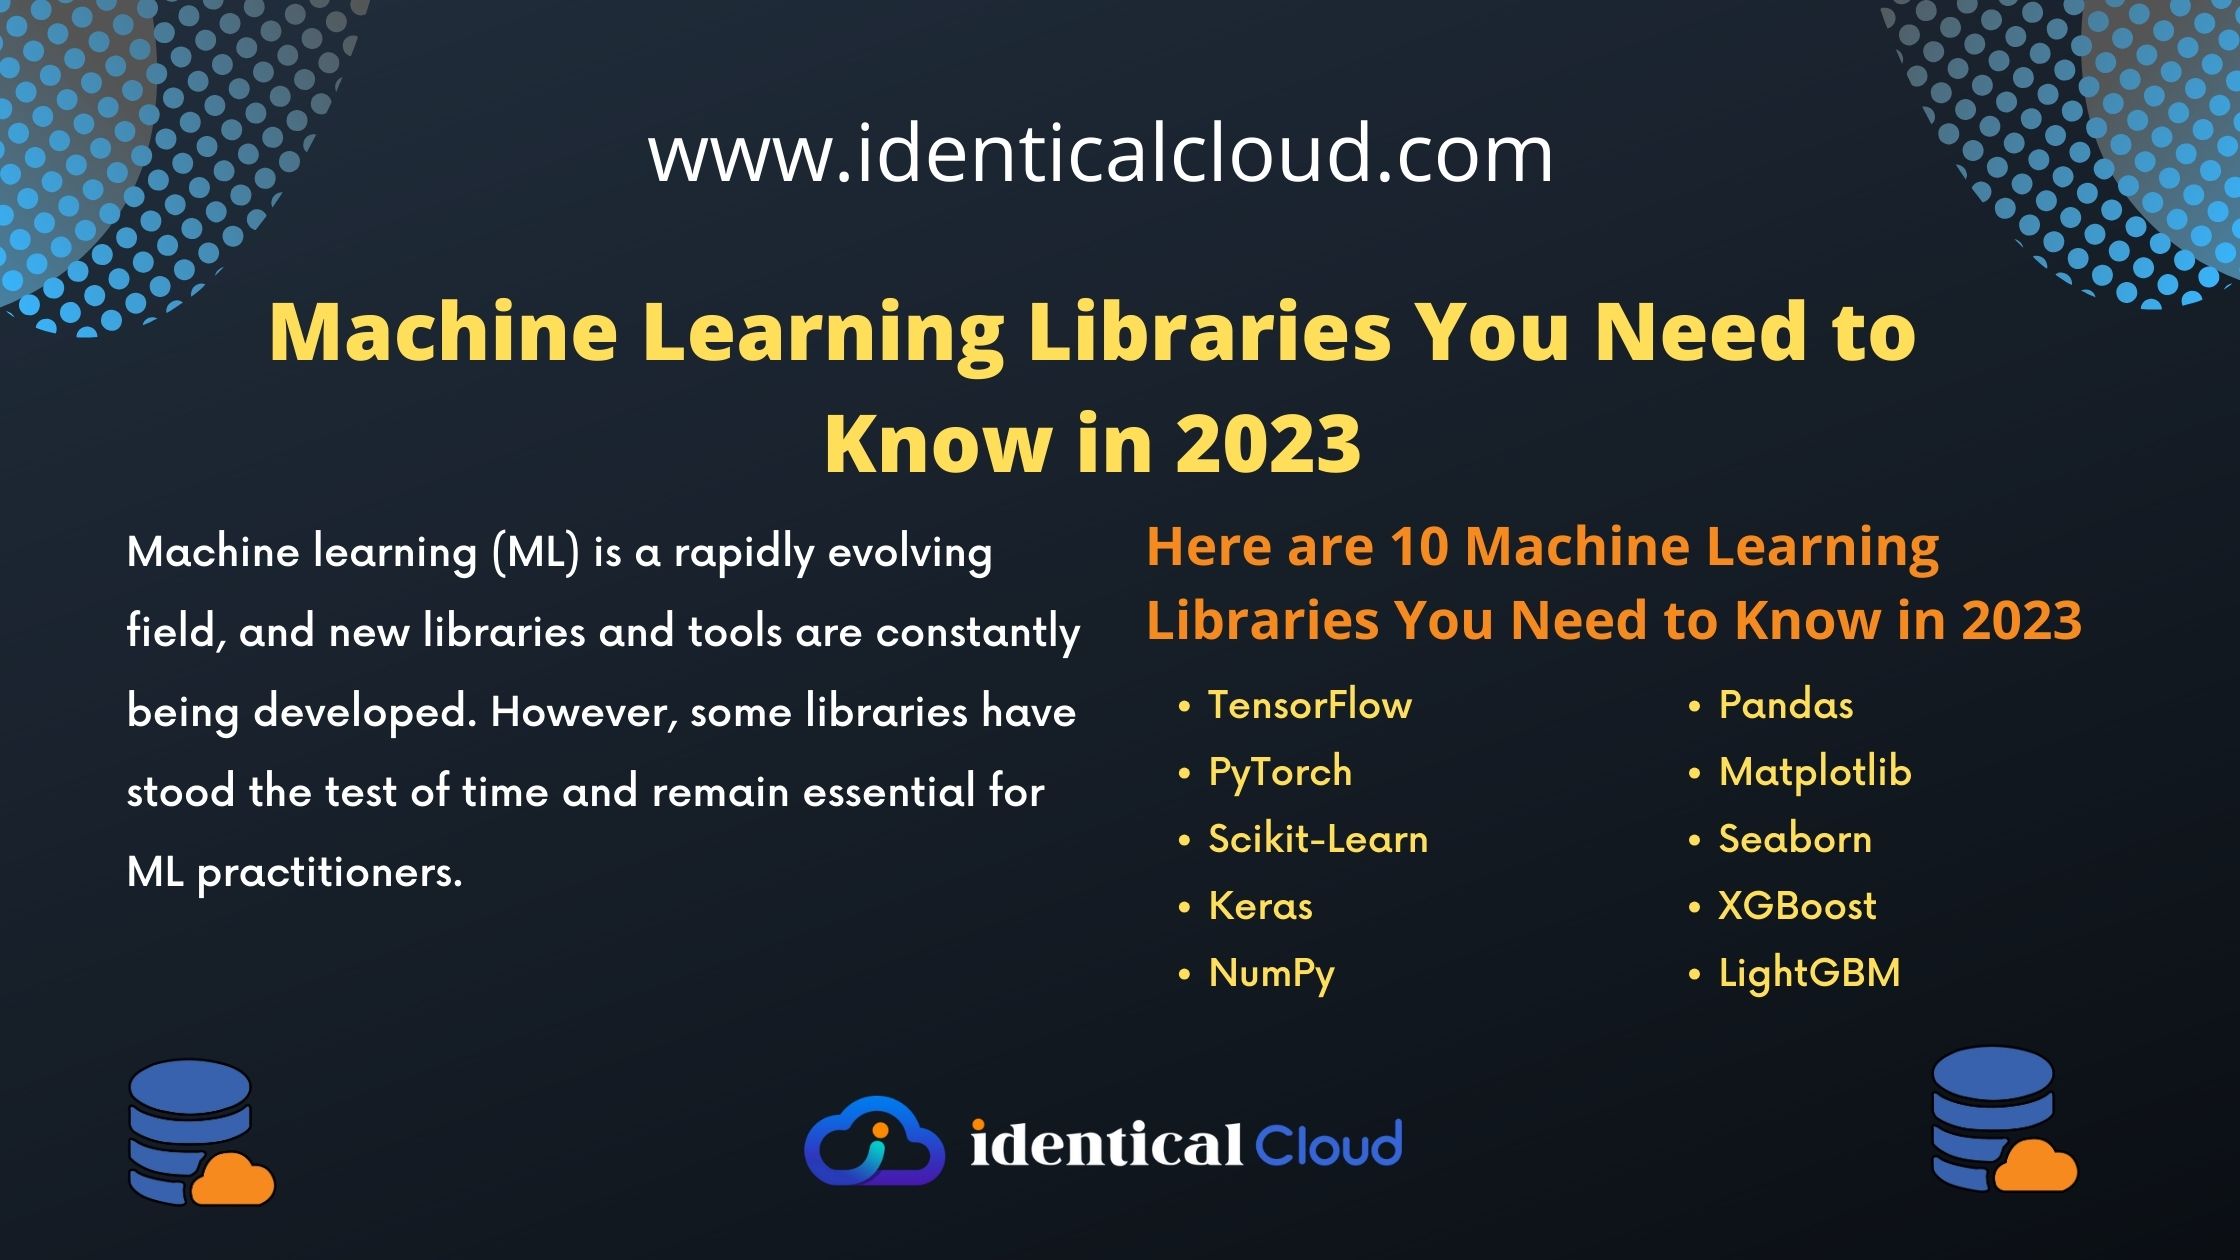 Machine Learning Libraries You Need to Know in 2023 - identicalcloud.com